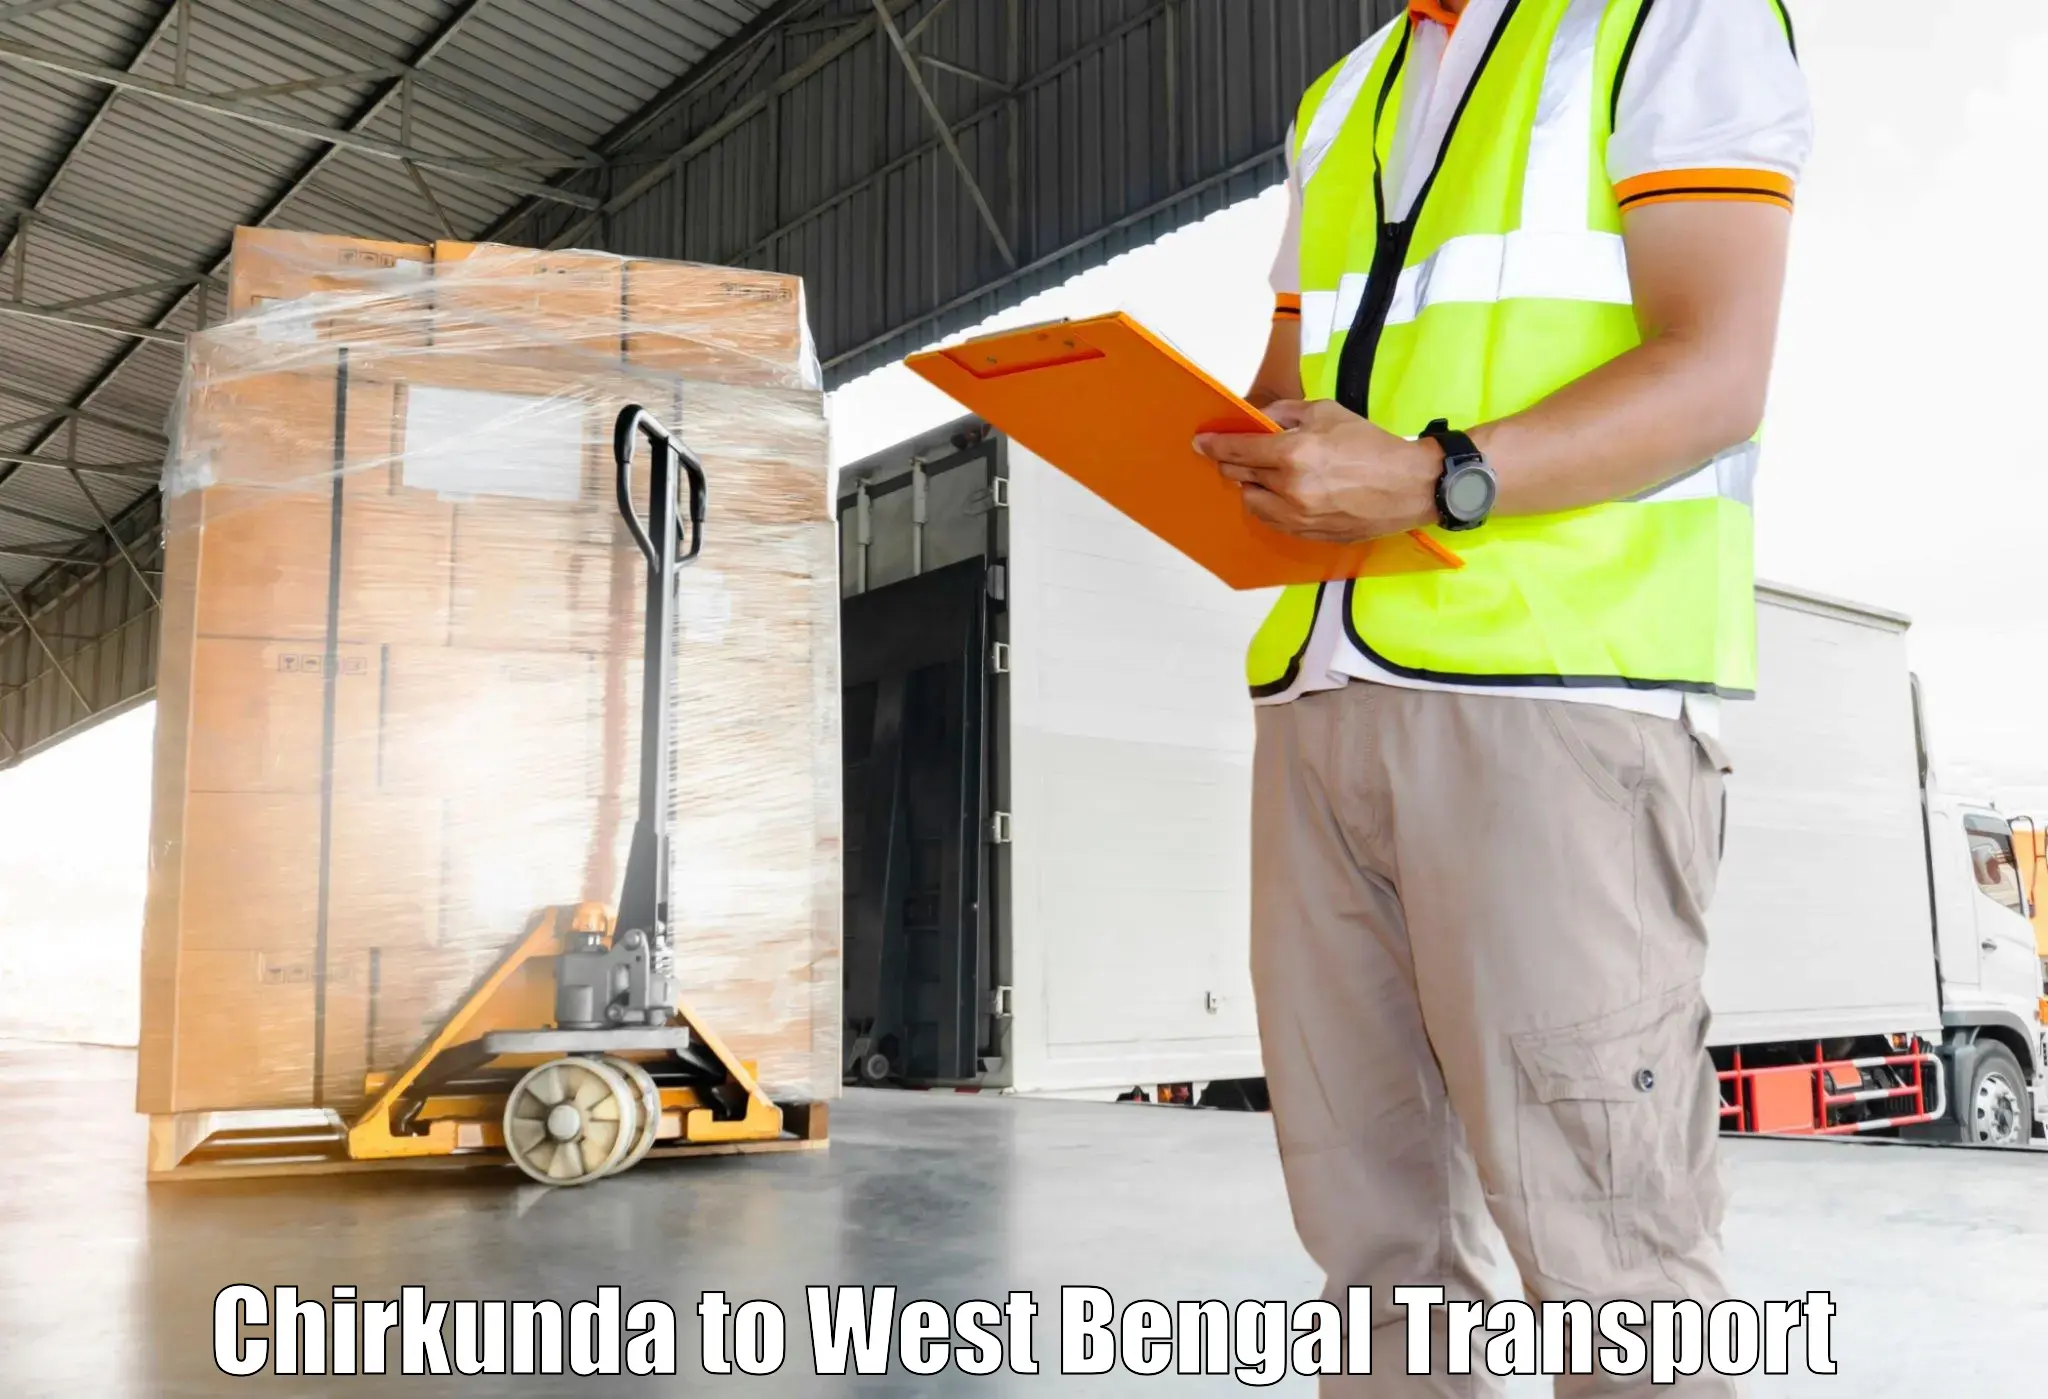 Express transport services Chirkunda to Canning